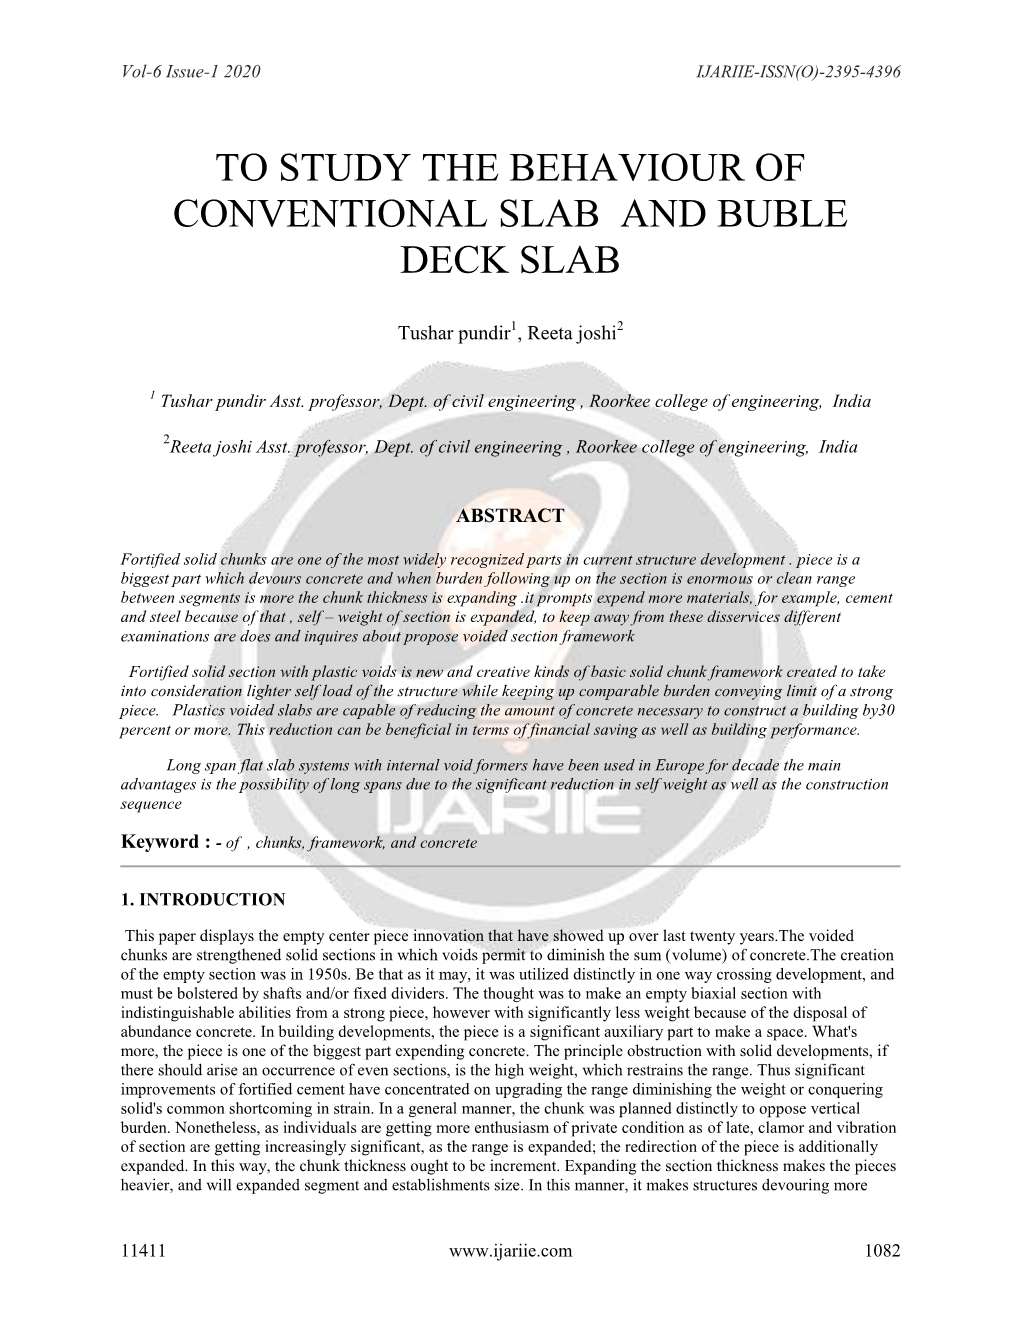 To Study the Behaviour of Conventional Slab and Buble Deck Slab